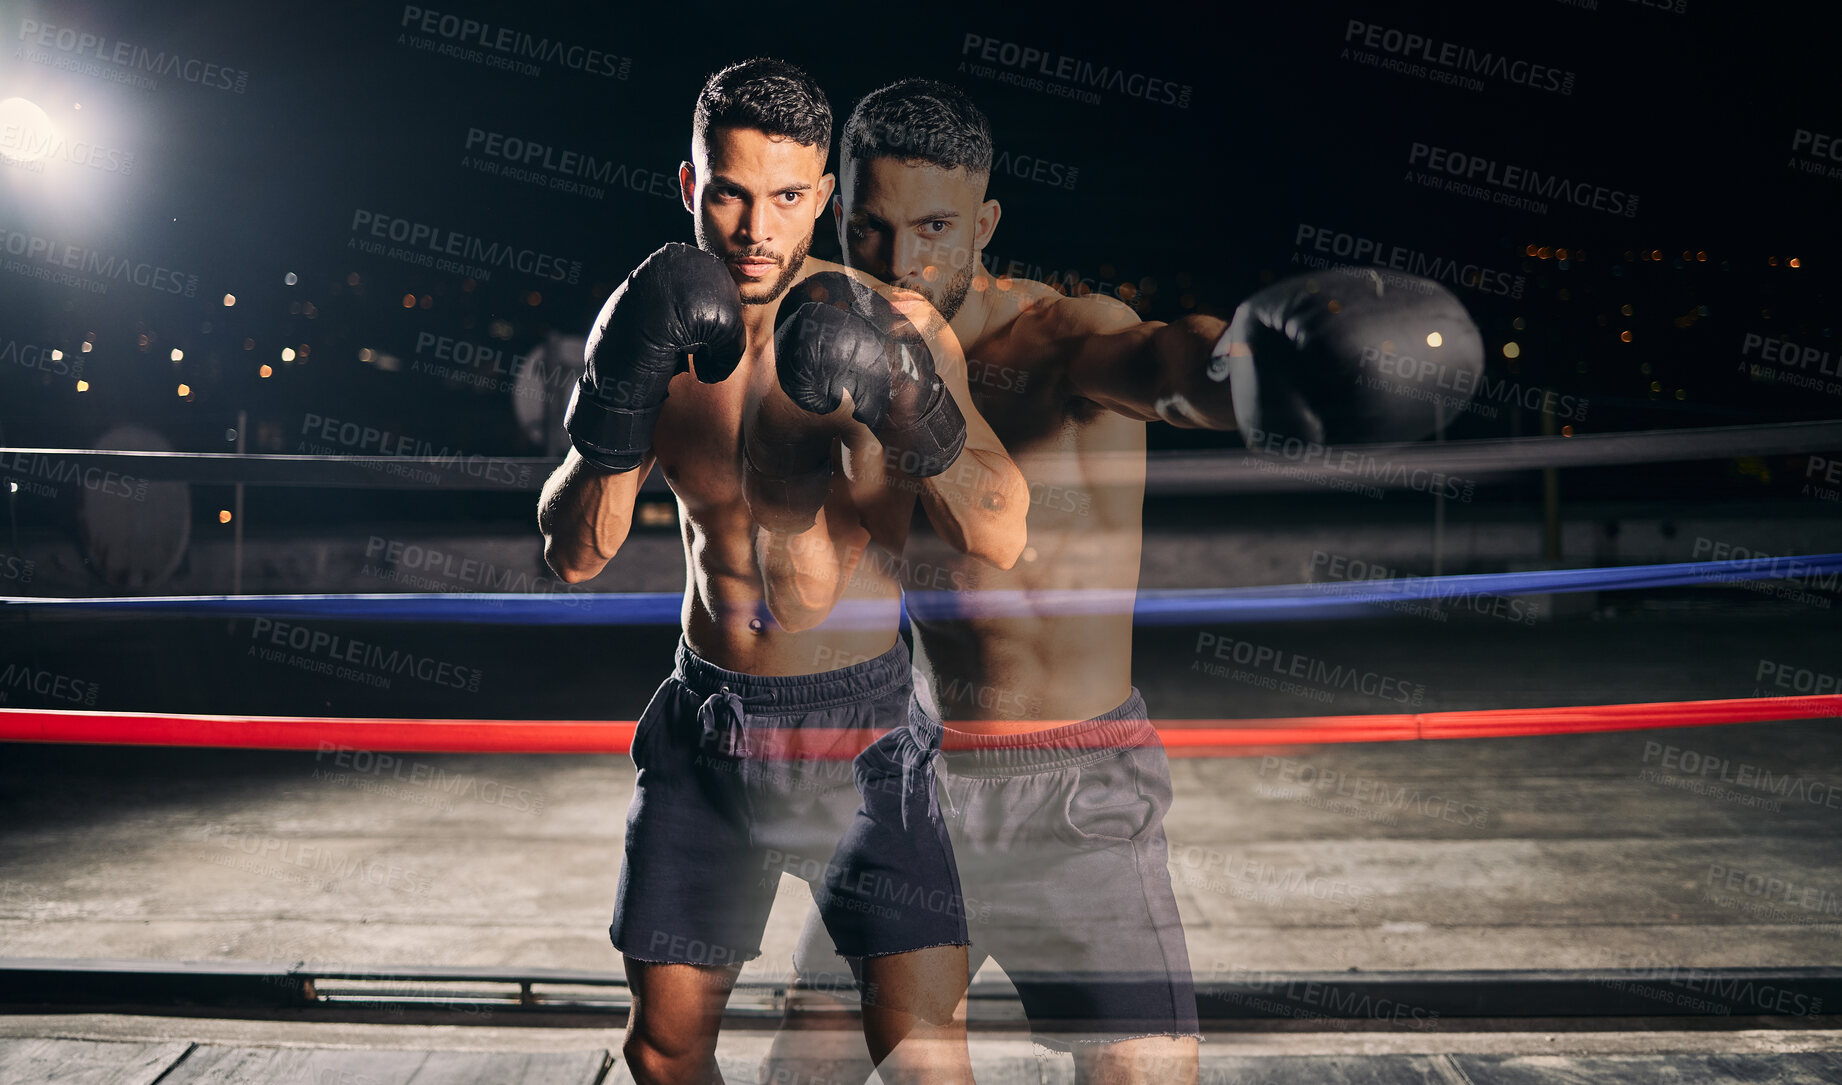 Buy stock photo Fitness, boxing and boxer in the ring training, exercise and punching with energy and power in a workout portrait. Action, performance and healthy man fighting to be a young sports champion athlete 